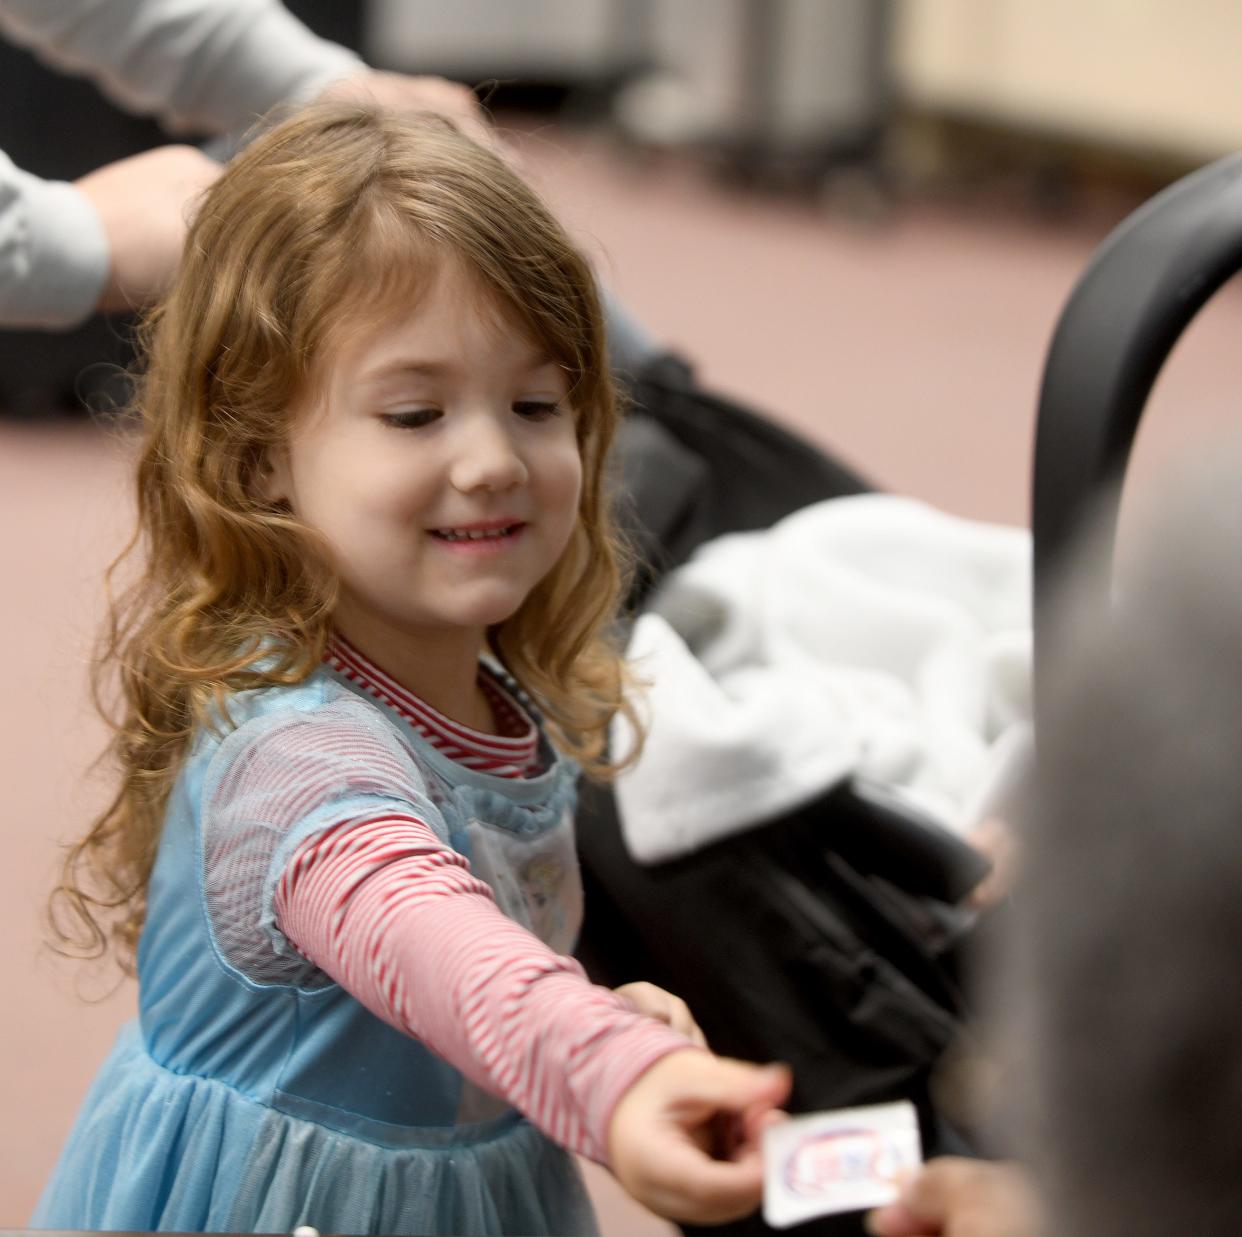 Madison Powers, 4, collects a voting sticker after her mother, Heather Powers of Massillon, cast her vote Tuesday at St. John Lutheran Church in Massillon.